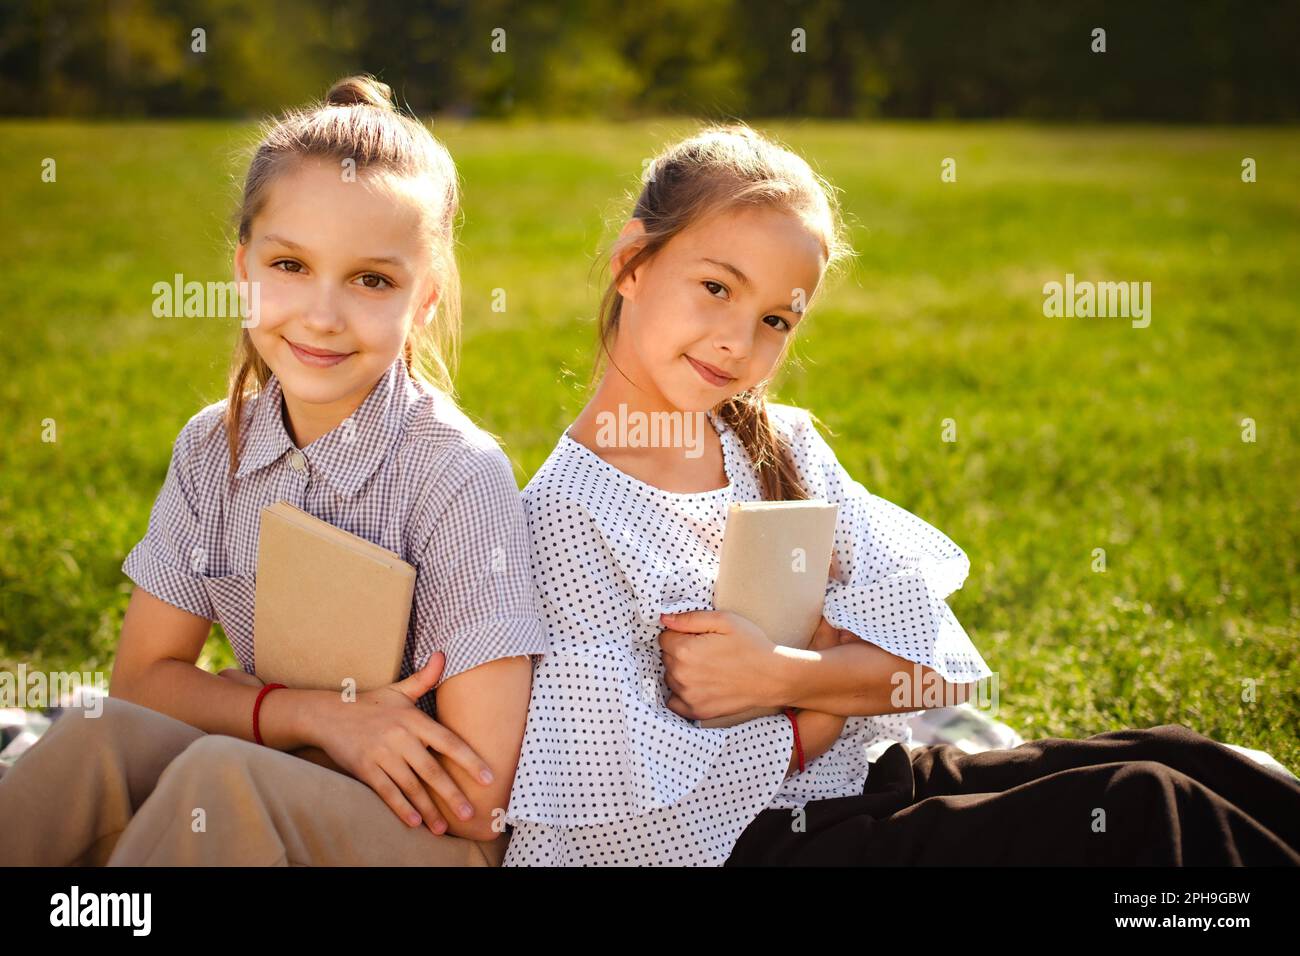 Portrait Of Two Happy Girls Sisters Reading In Green Park Girls Hold